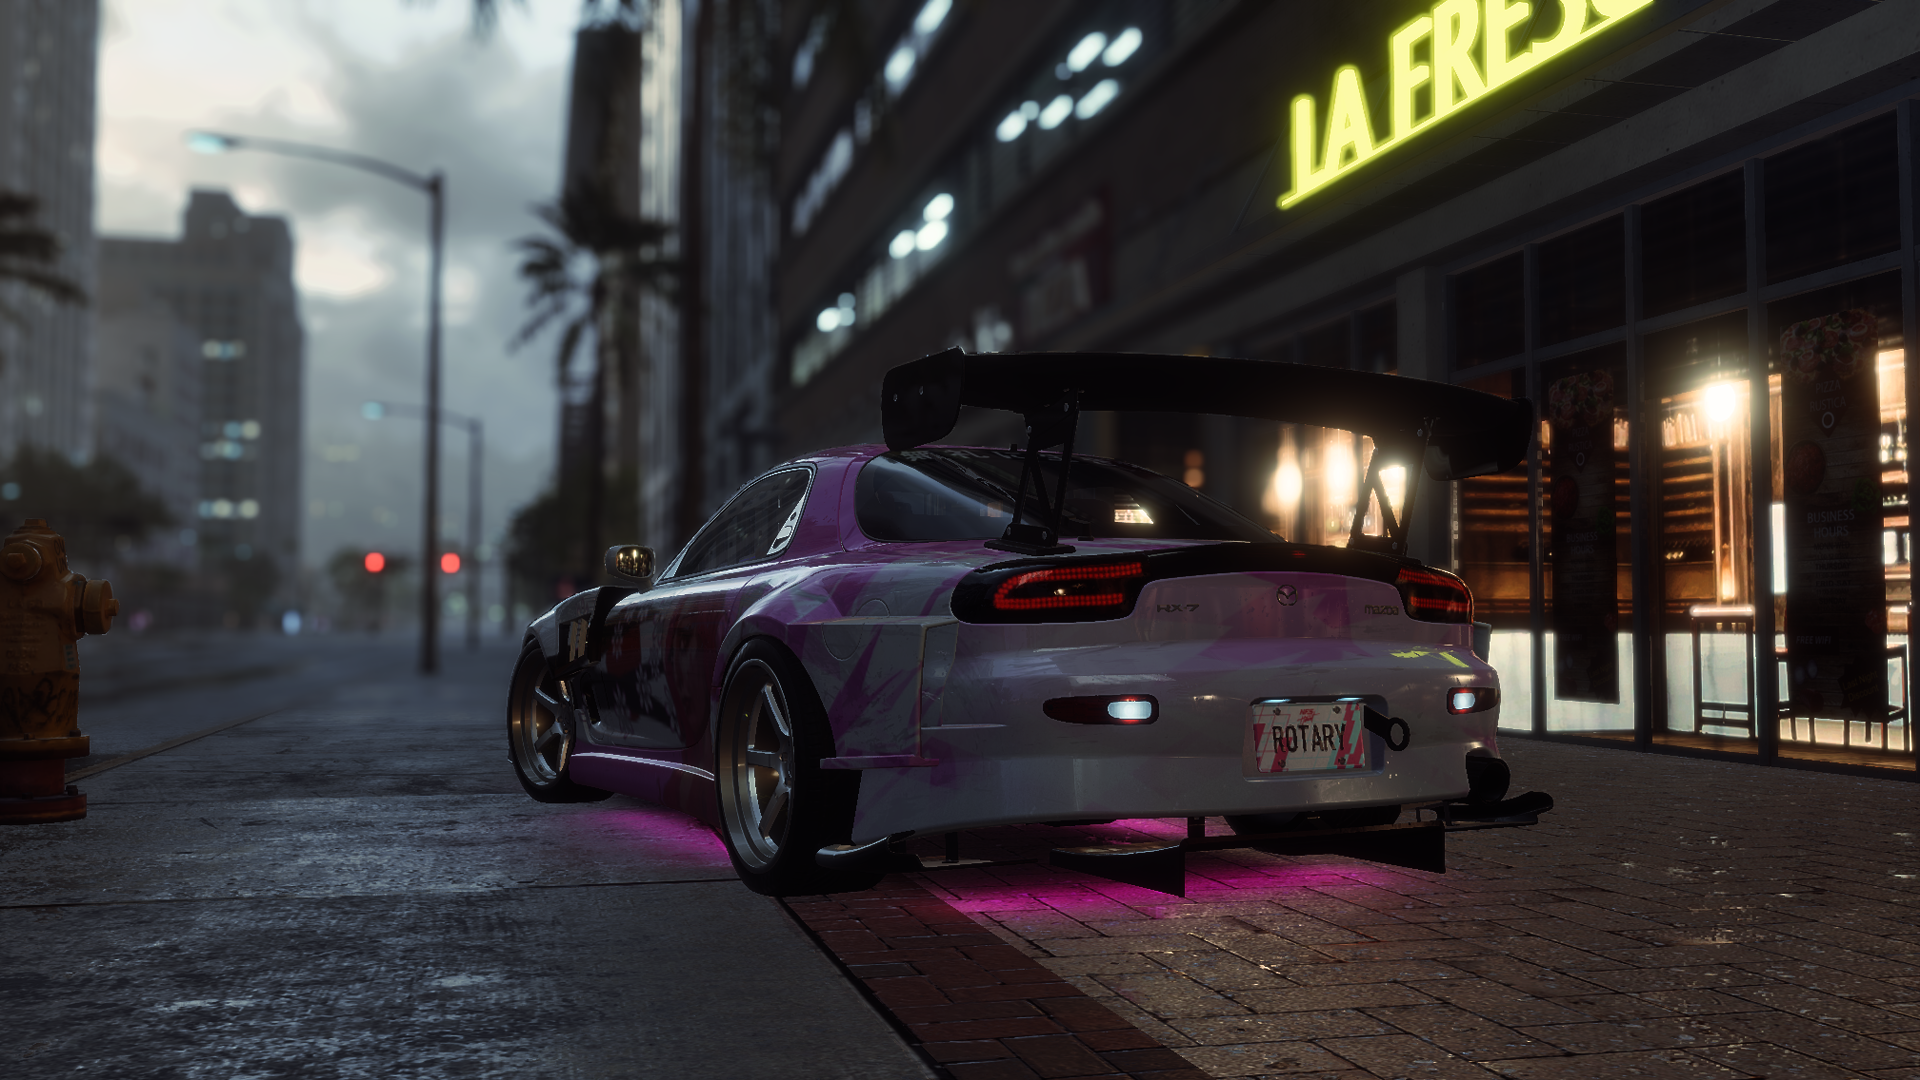 General 1920x1080 Need for Speed: Heat Mazda RX-7 video games Mazda Japanese cars bodykit Electronic Arts rear view licence plates video game art screen shot street light building sidewalks depth of field fire hydrants vehicle car clouds CGI sky